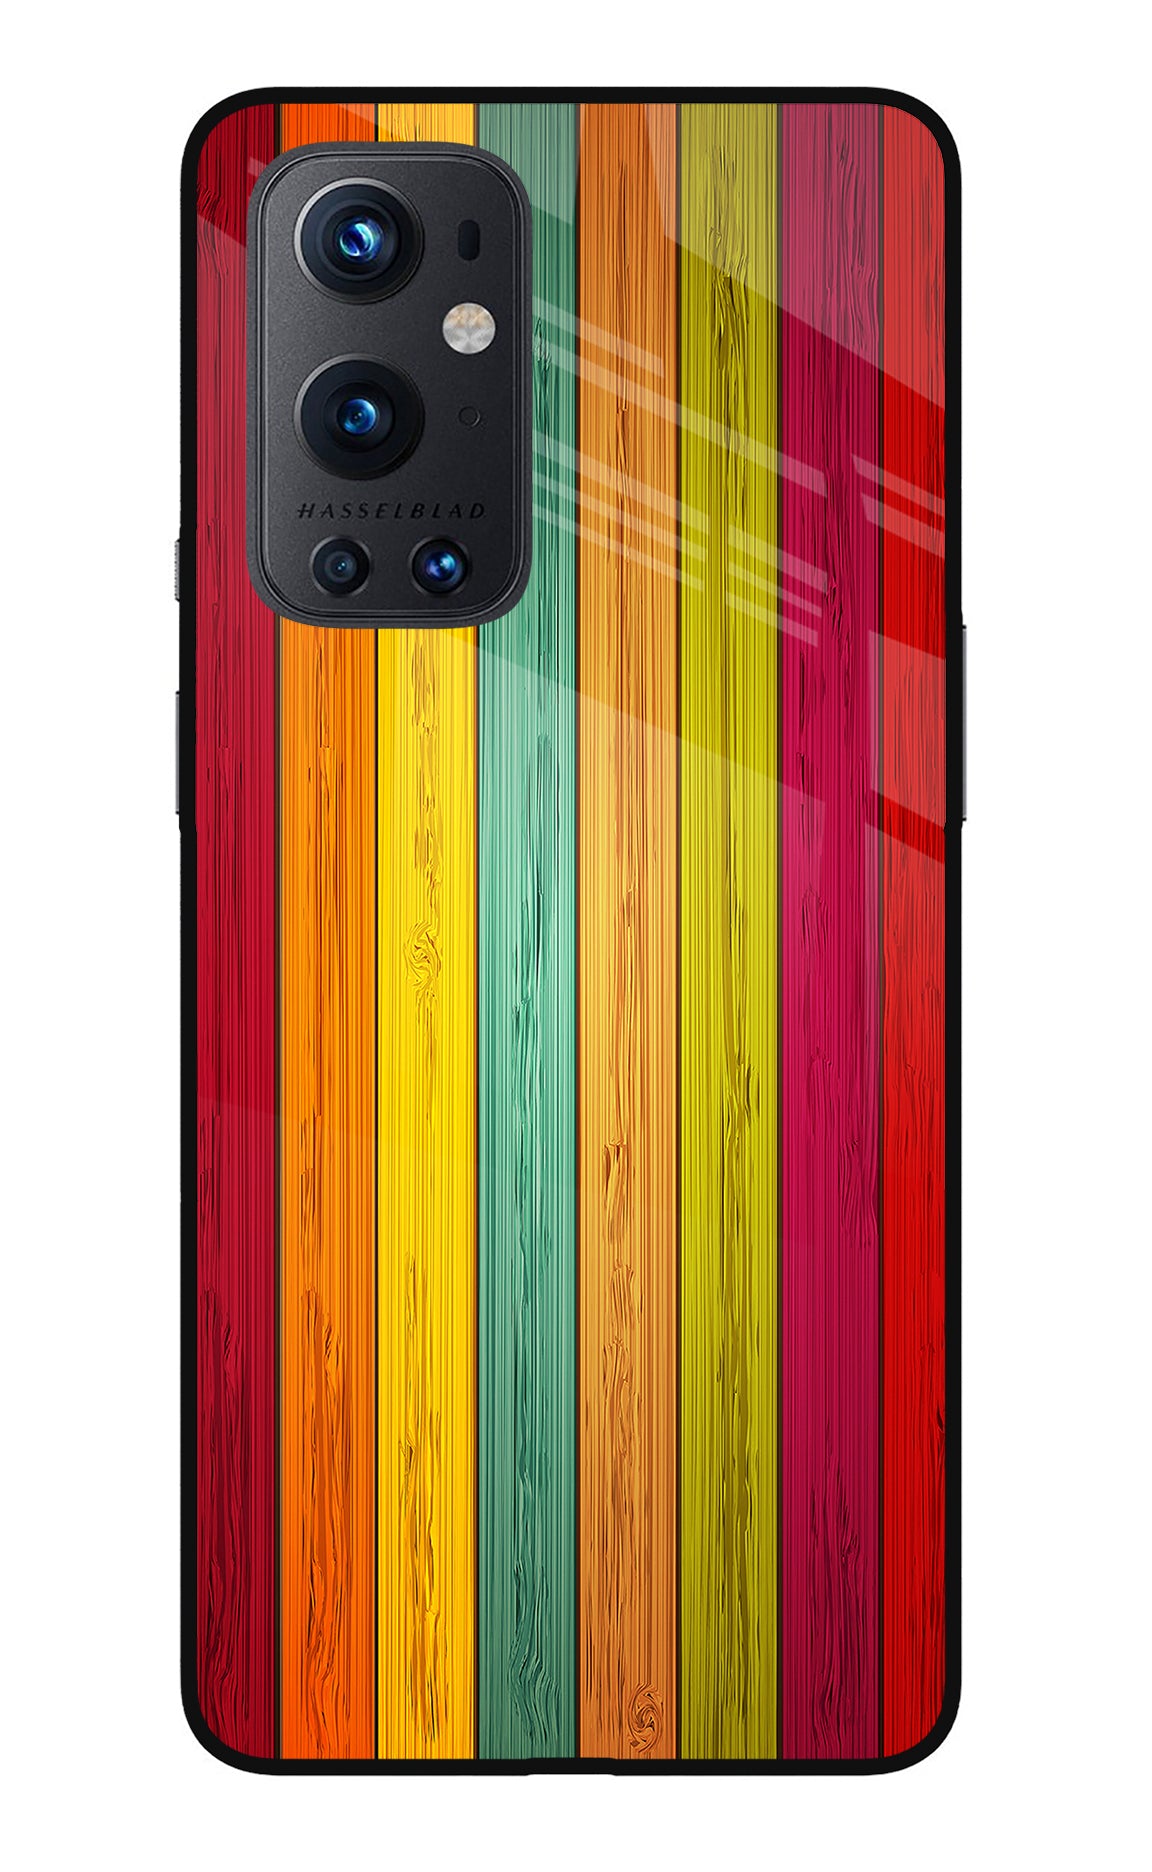 Multicolor Wooden Oneplus 9 Pro Back Cover